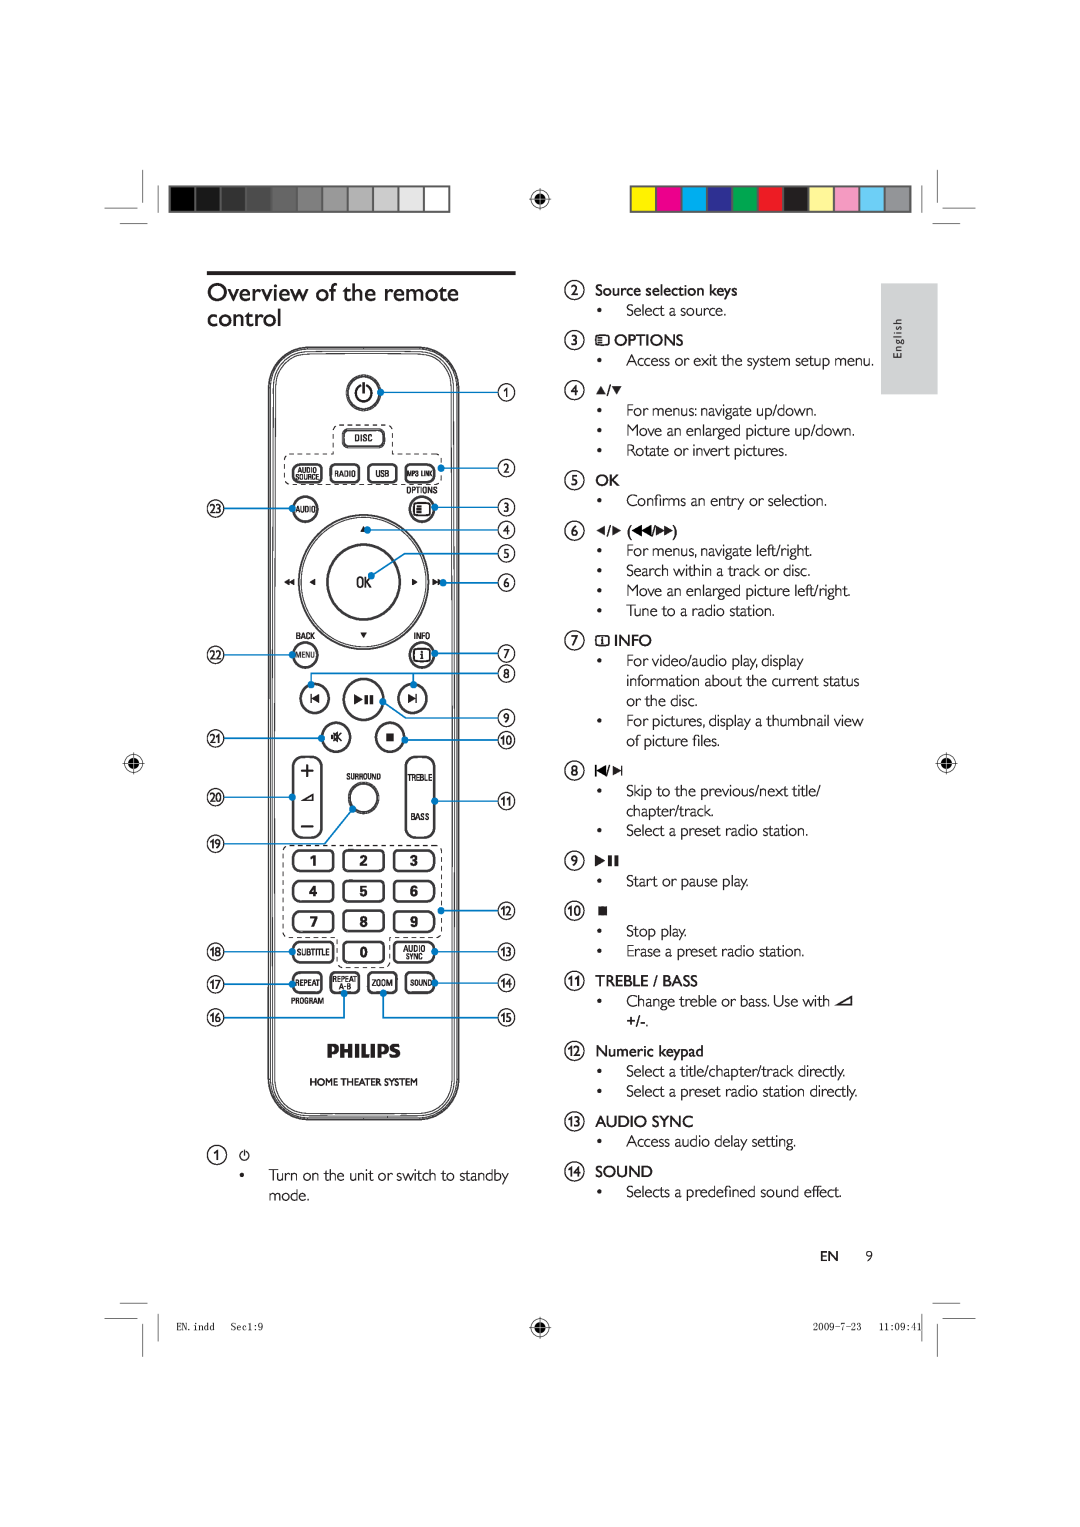 Philips HSB2351X/78 manual Overview of the remote, control 